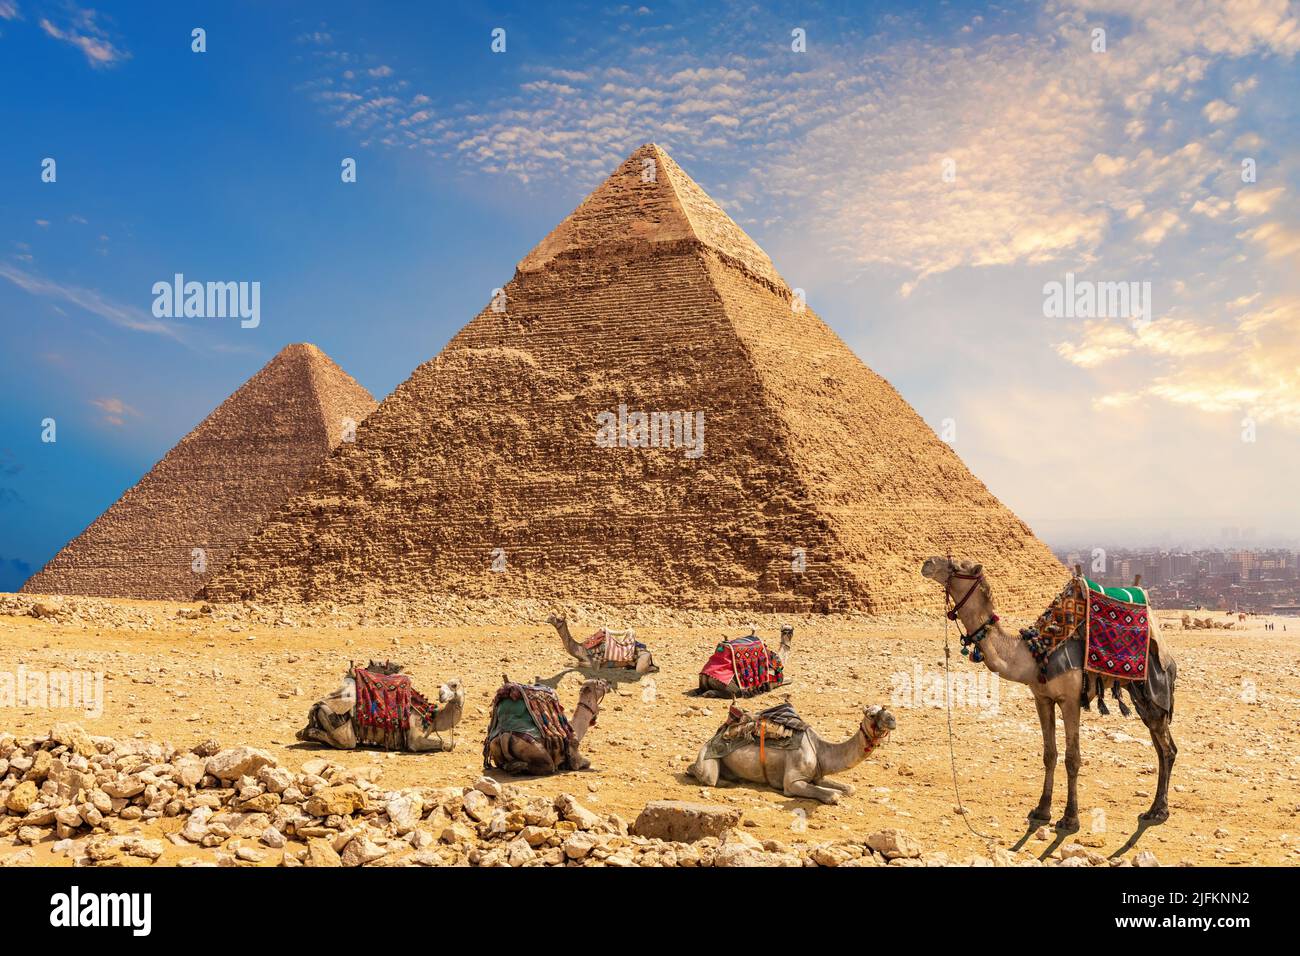 amel caravan resting in the desert by the Pyramid of Chephren and Cheops, Egypt, Giza. Stock Photo